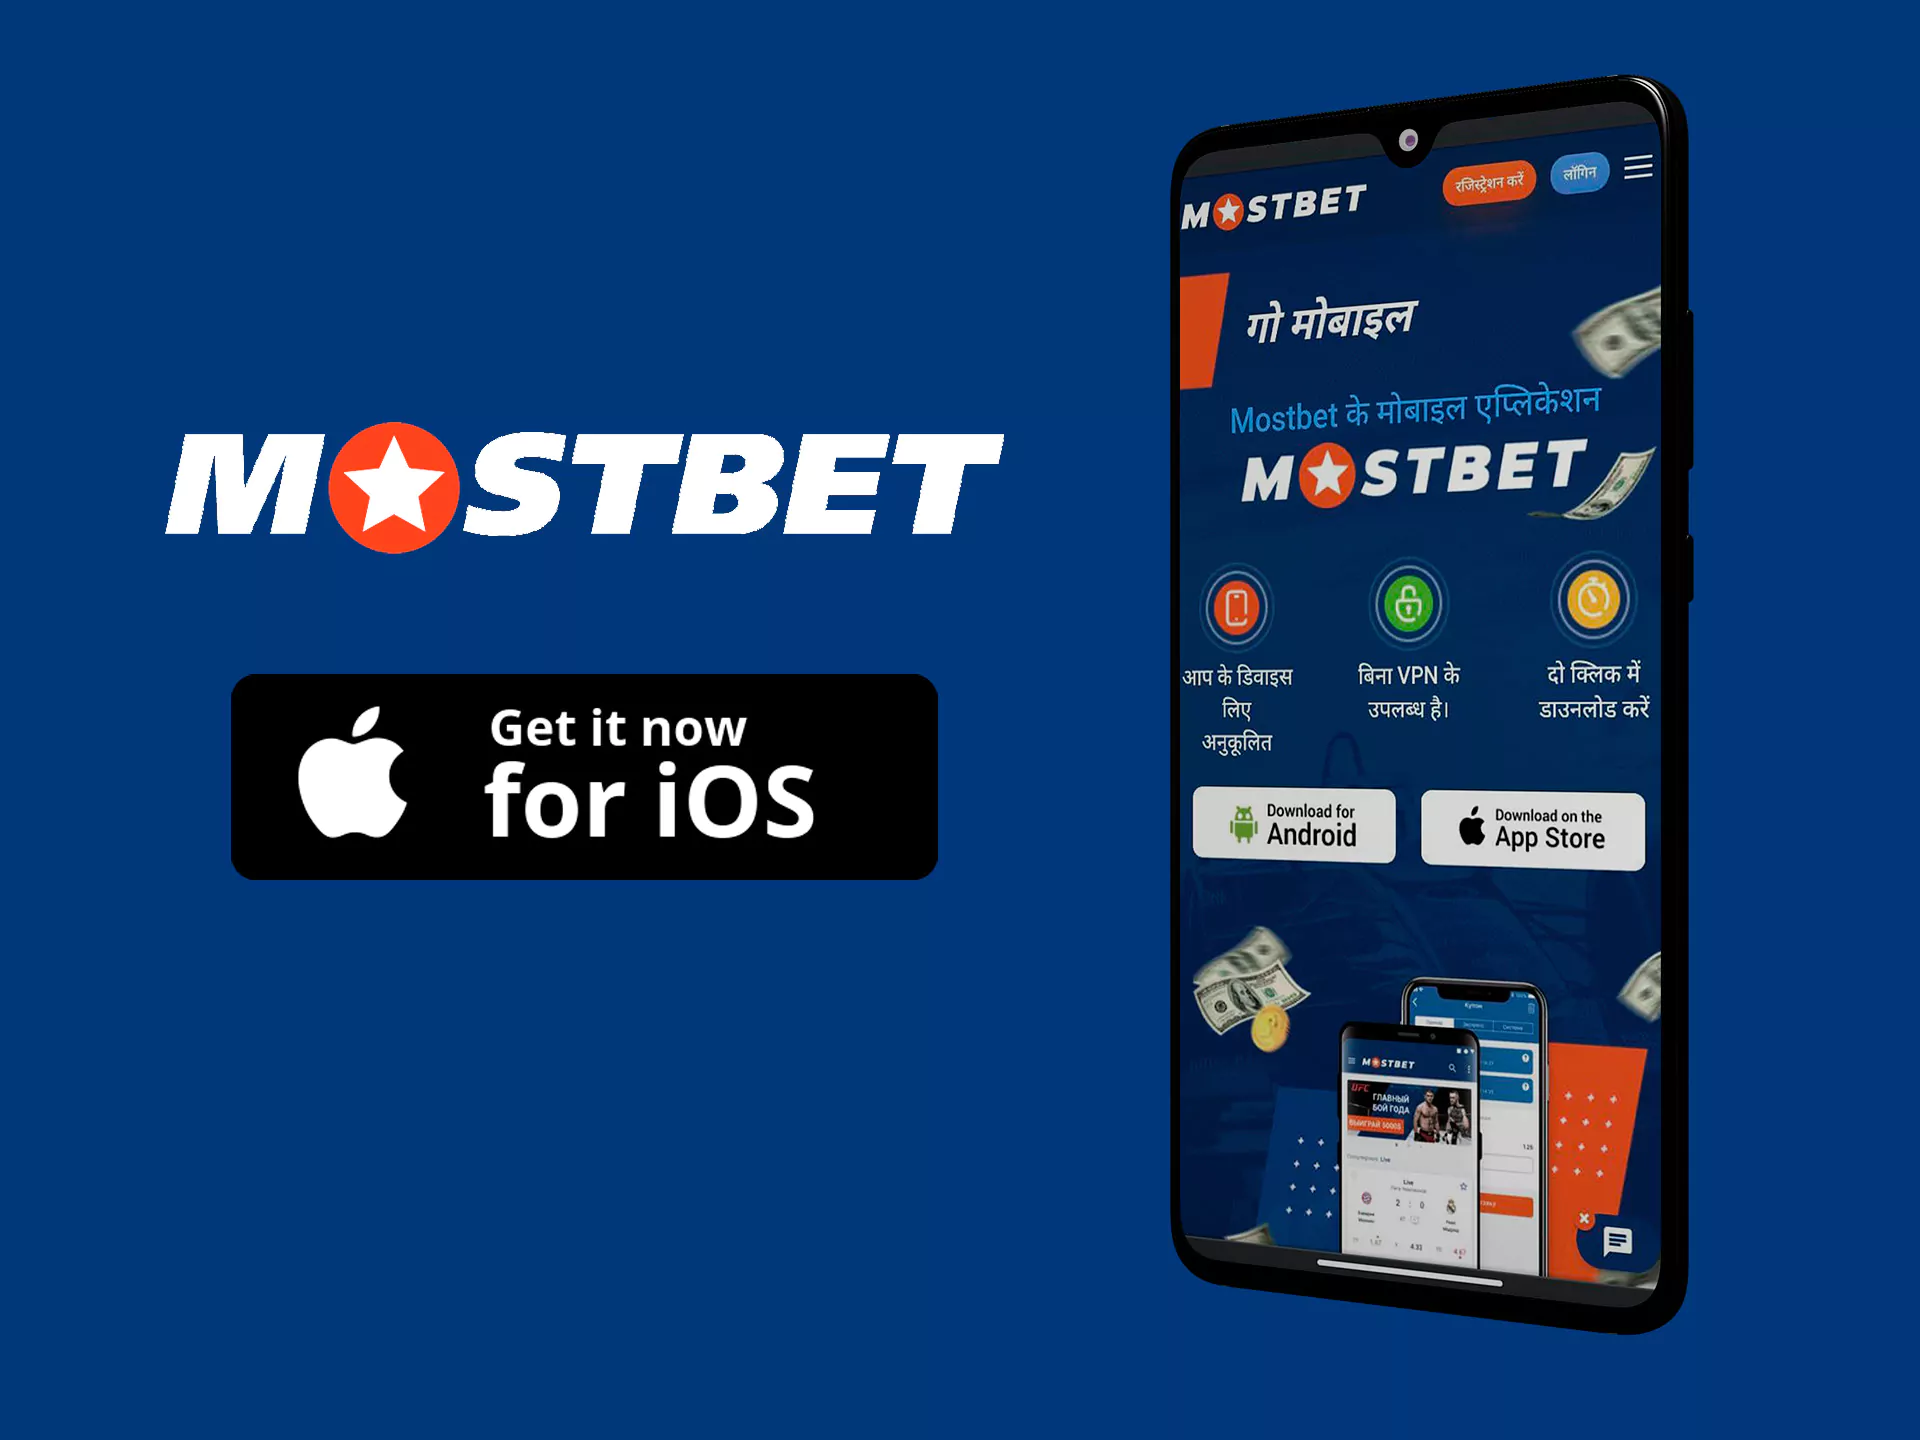 You can install the Mostbet app on your iPhone or iPad.